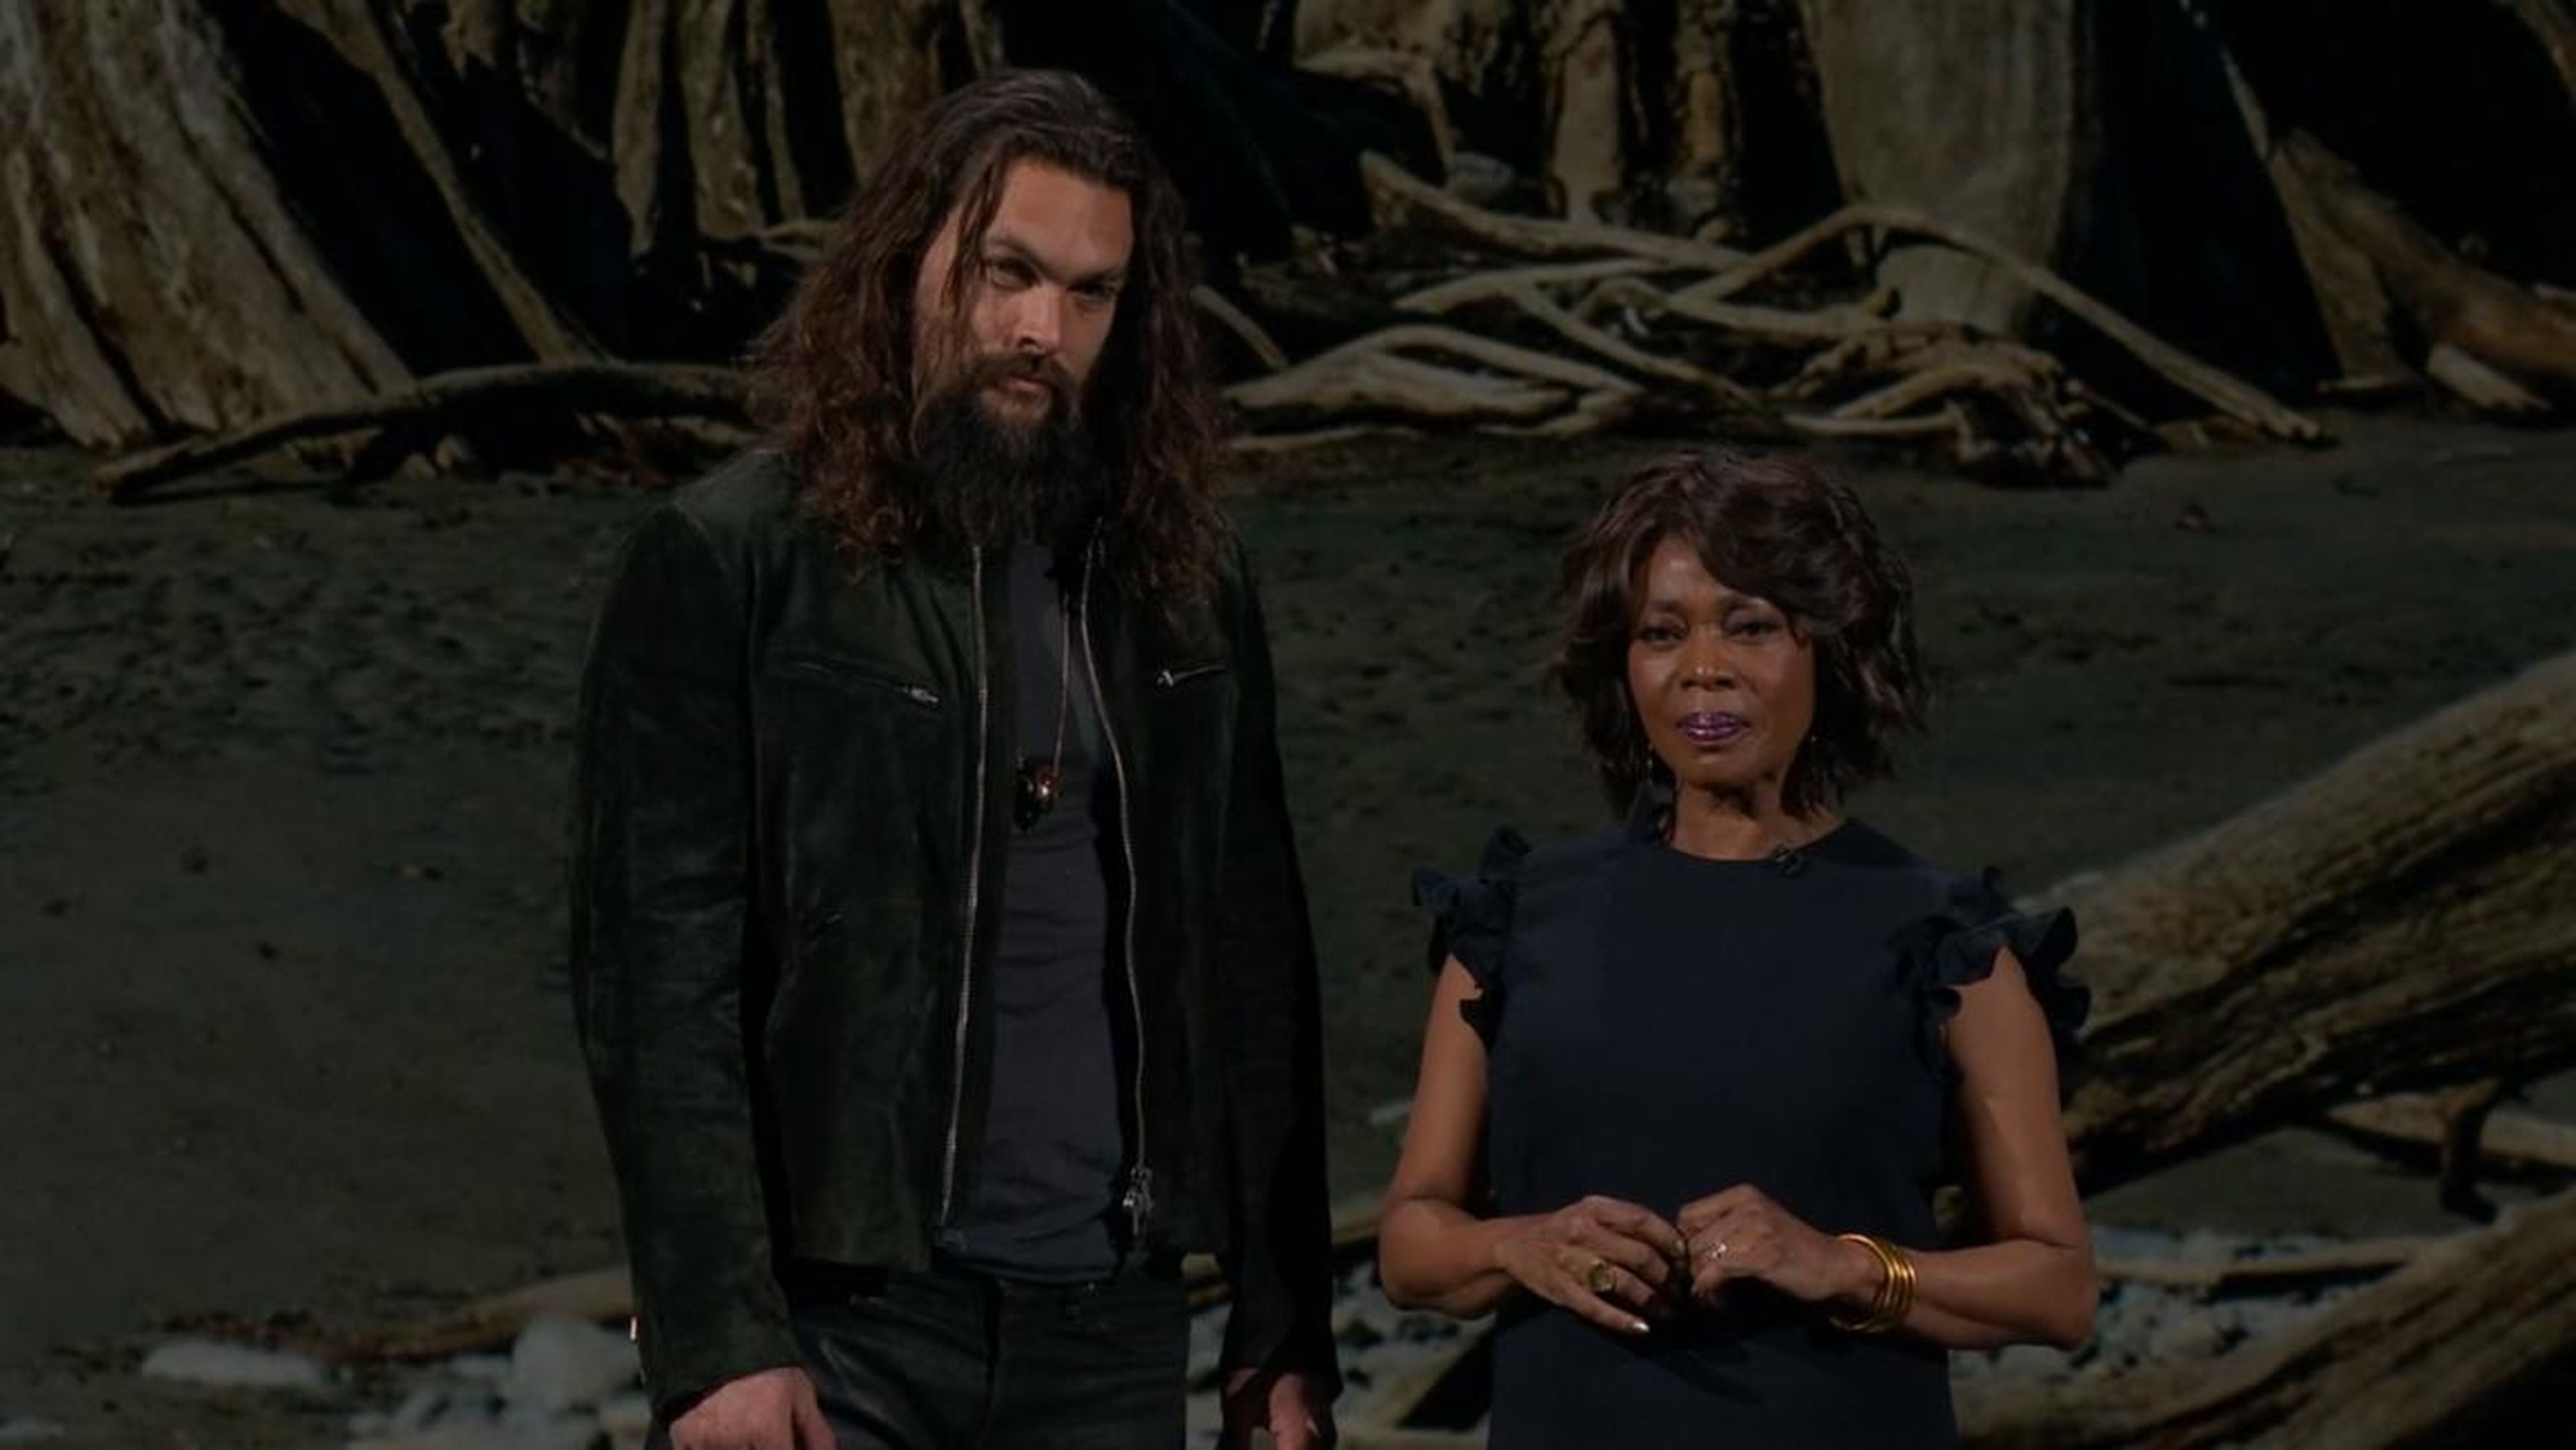 Jason Momoa and Alfre Woodard introduced "See," a show about a world where the Earth is devastated by a virus that leaves only a few million survivors, who are all blind.